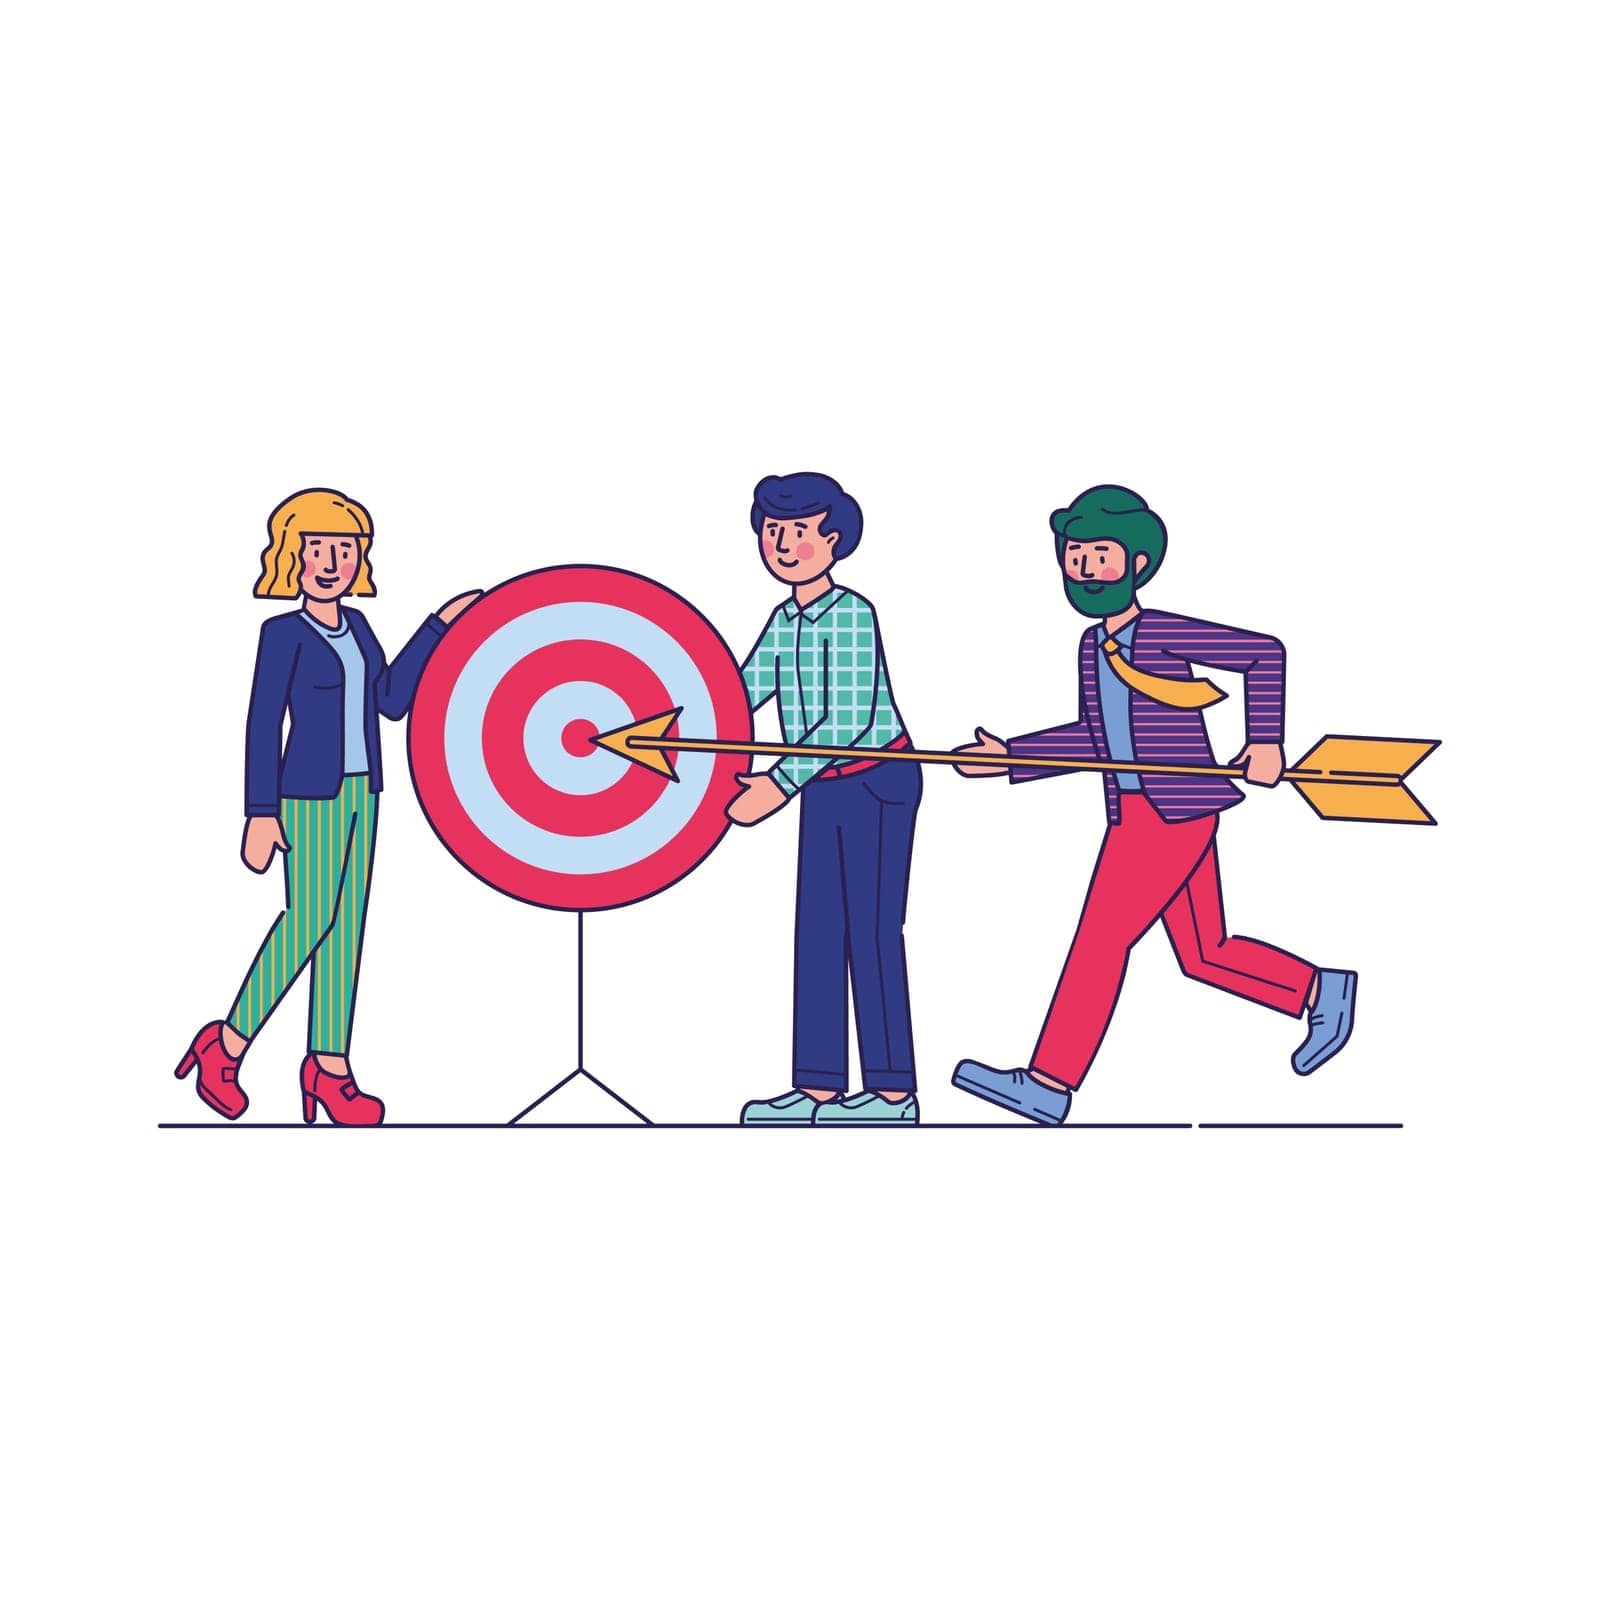 Successful team carrying arrow to aim. Business professional hitting target together. Vector illustration for challenge, goal, achievement, teamwork, business, marketing, strategy concept